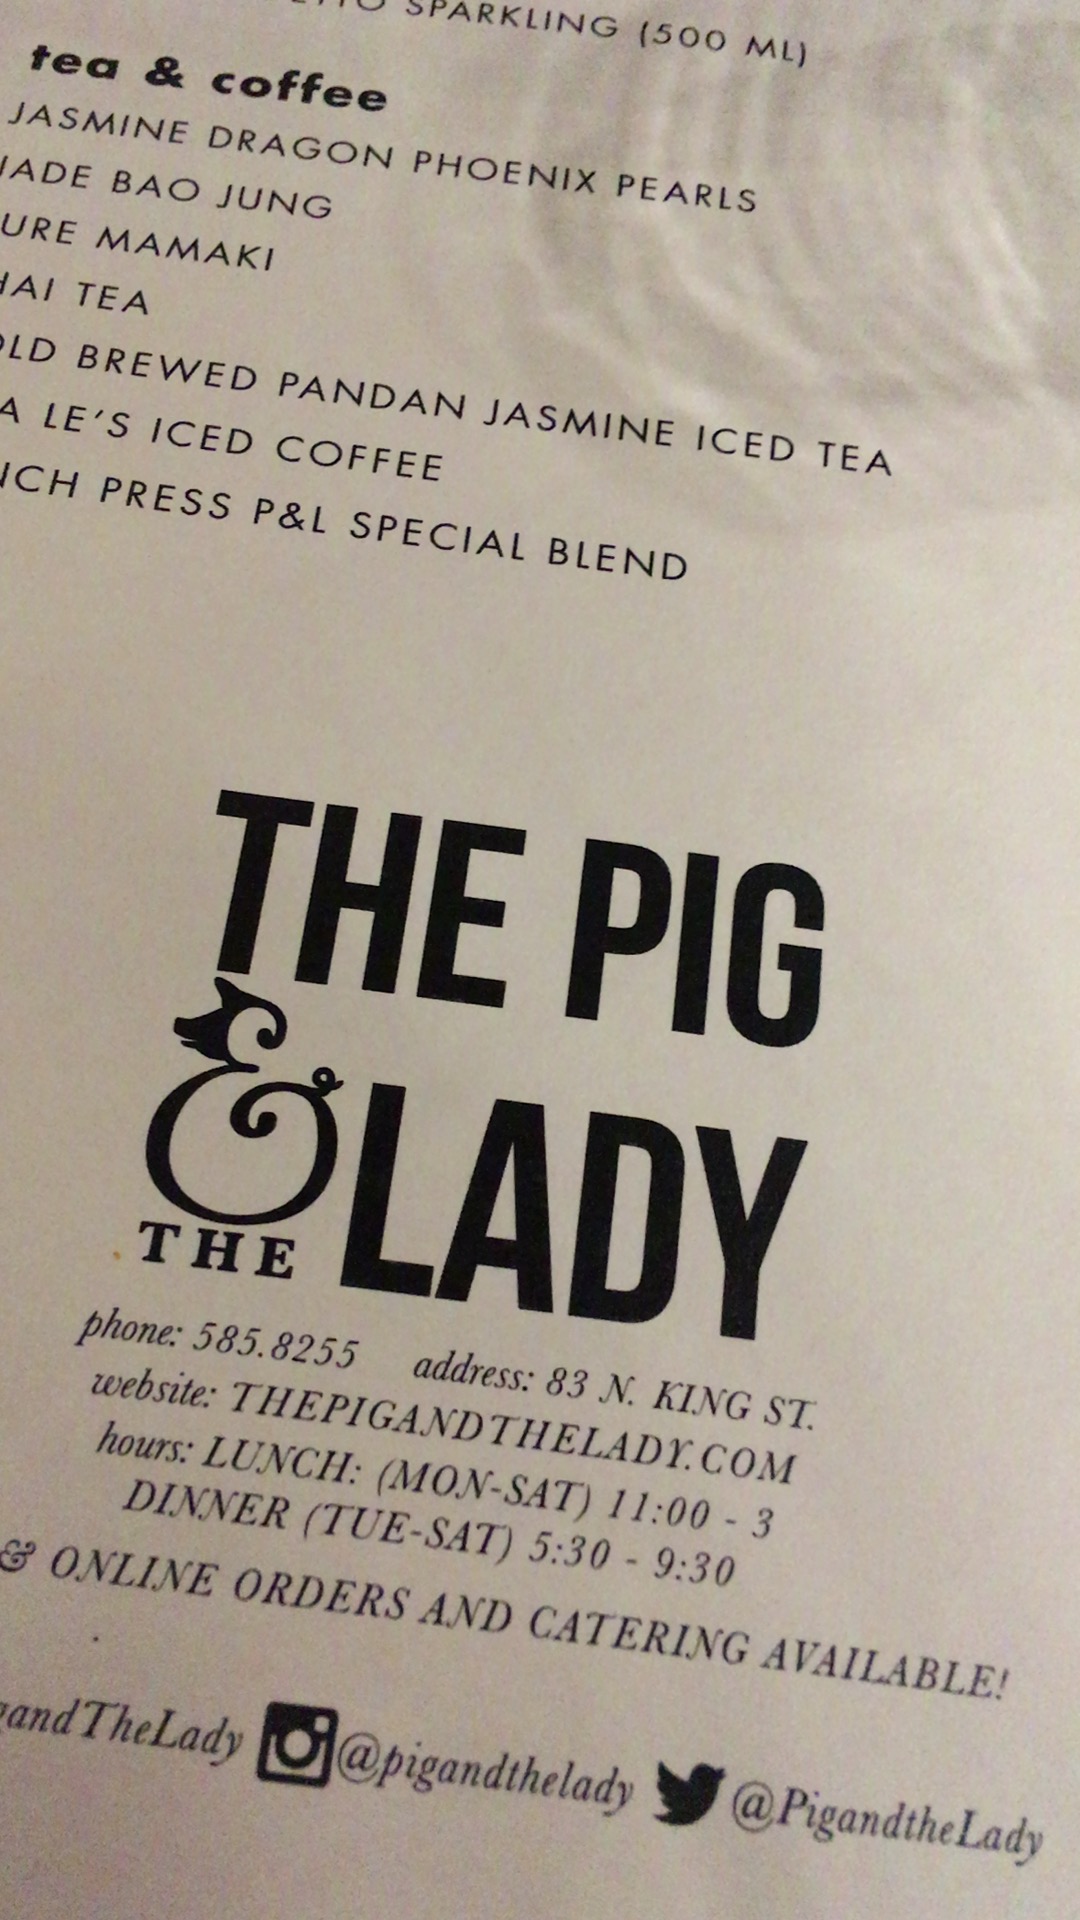 THE PIG and THE LADY